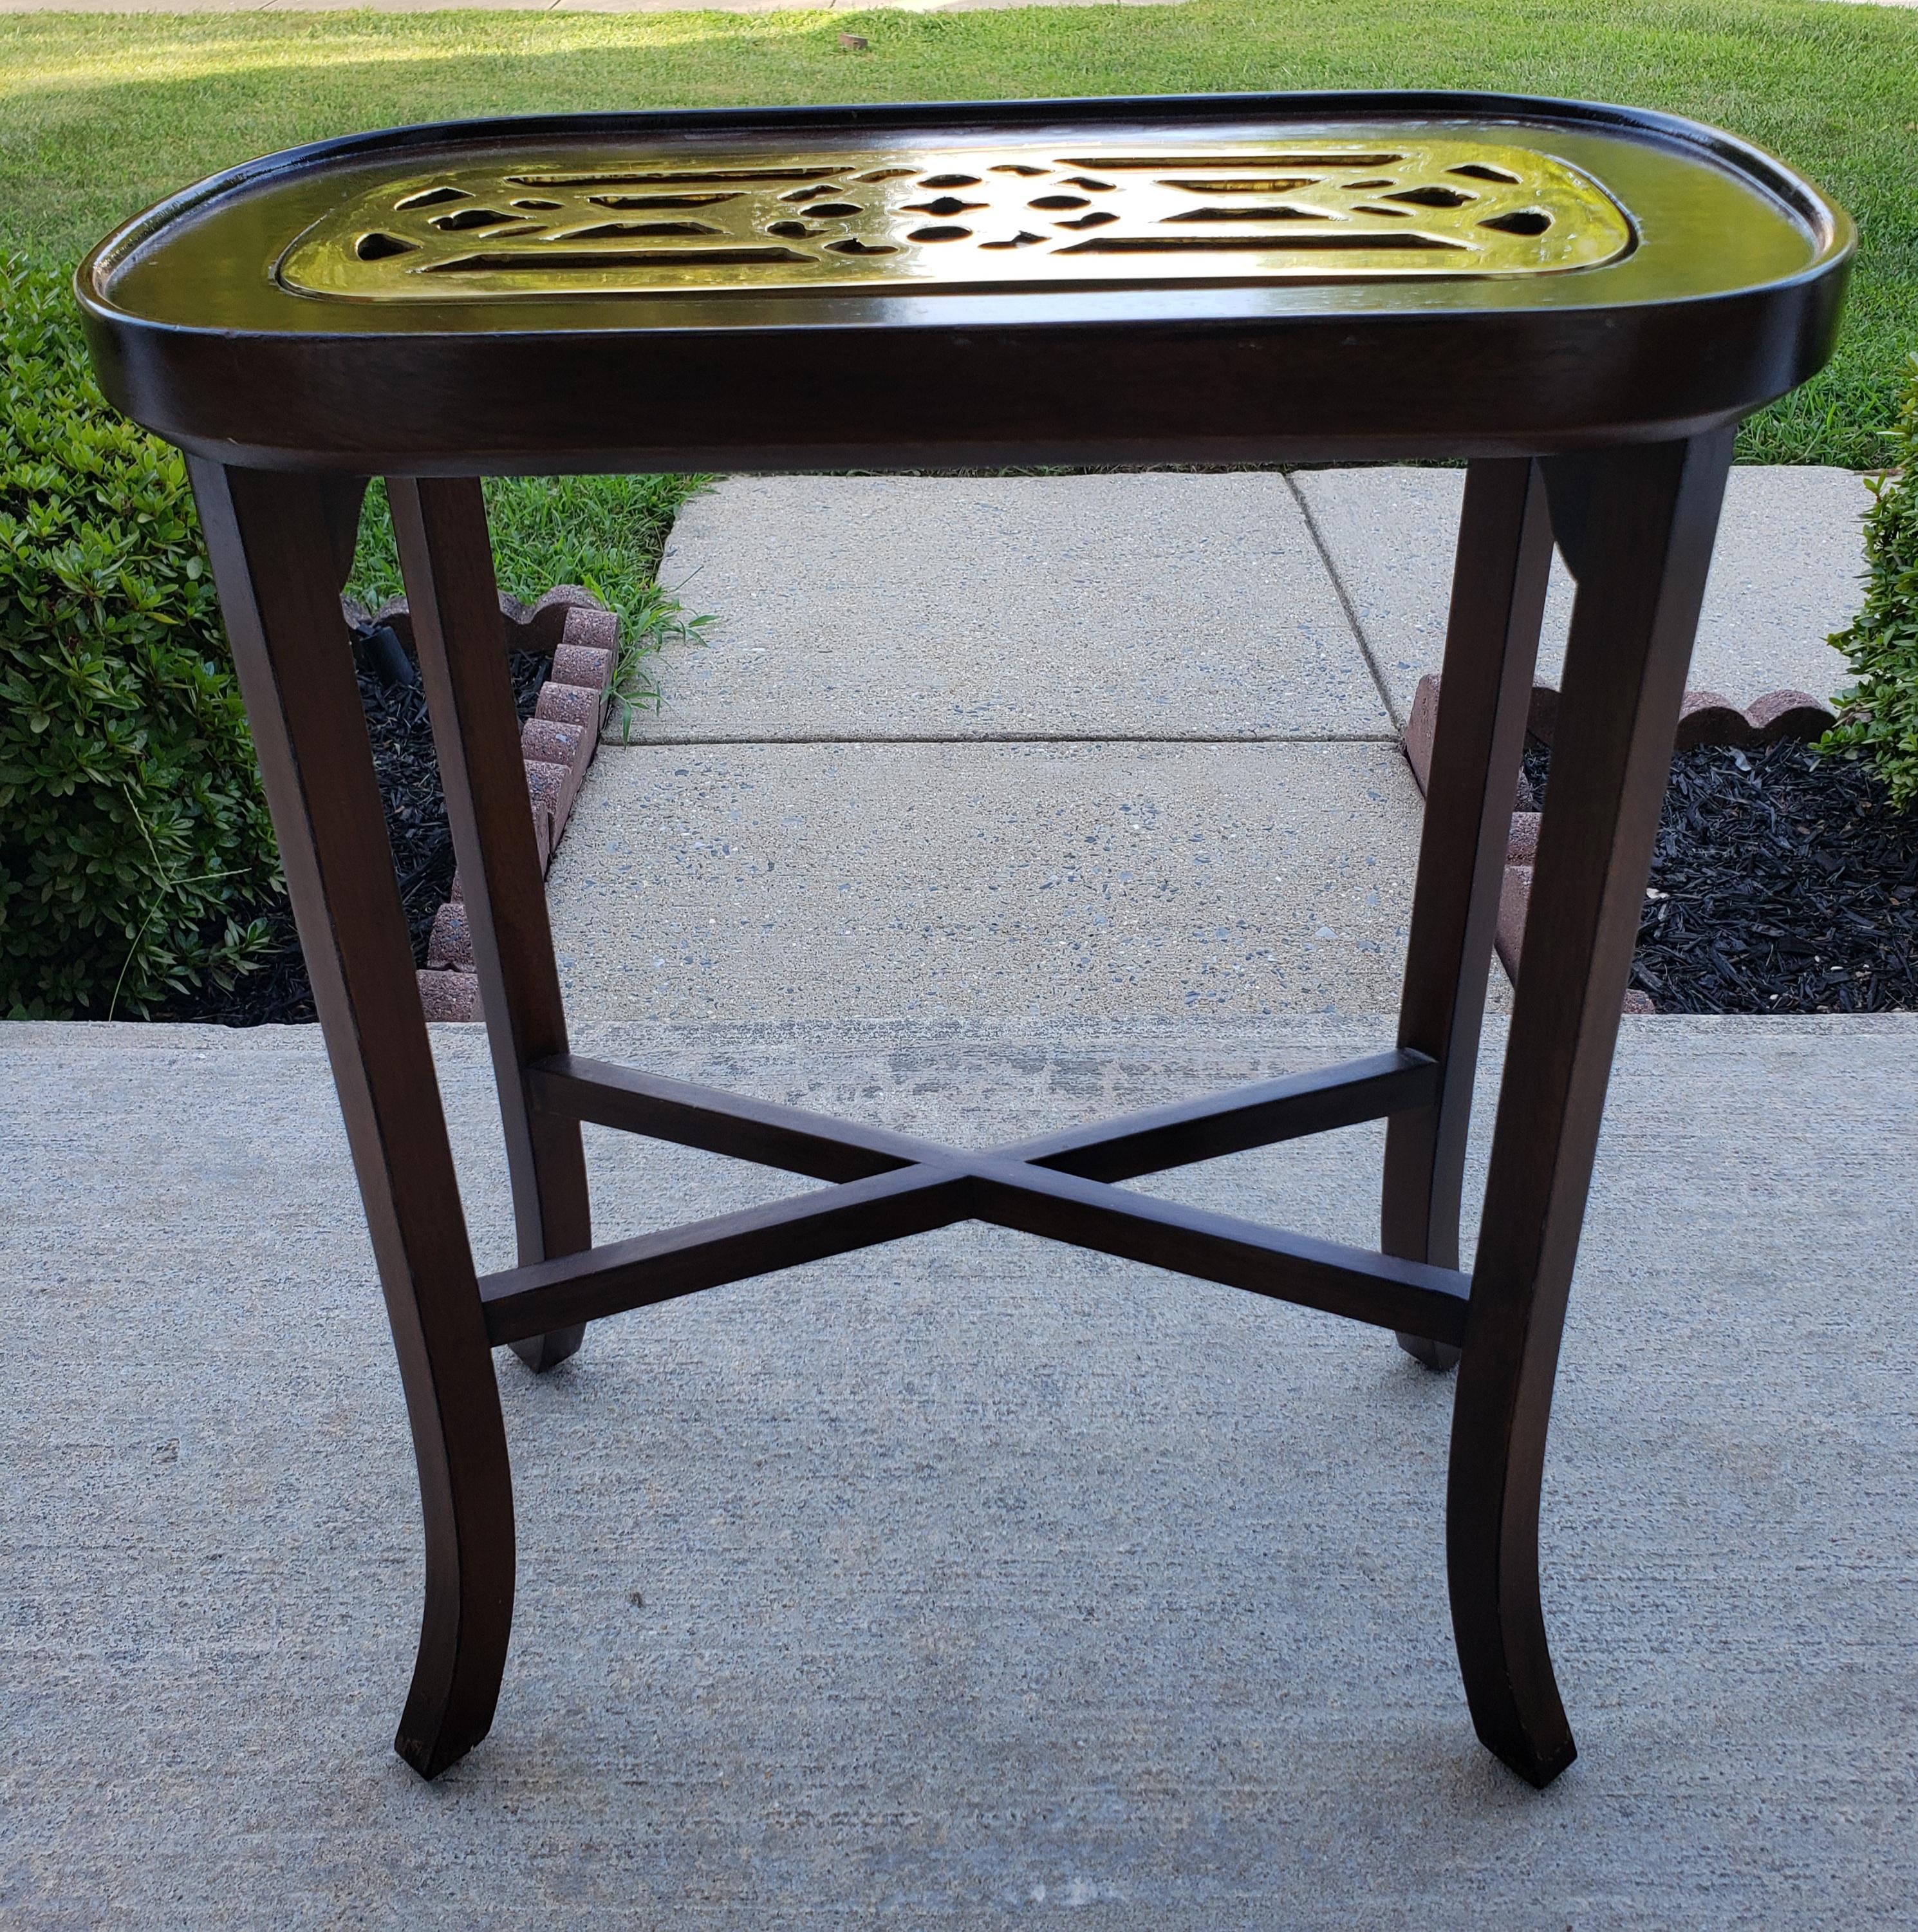 Late 20th Century Cherry with Brass Insert Candle Stand Side Table Kettle Stand In Good Condition For Sale In Germantown, MD